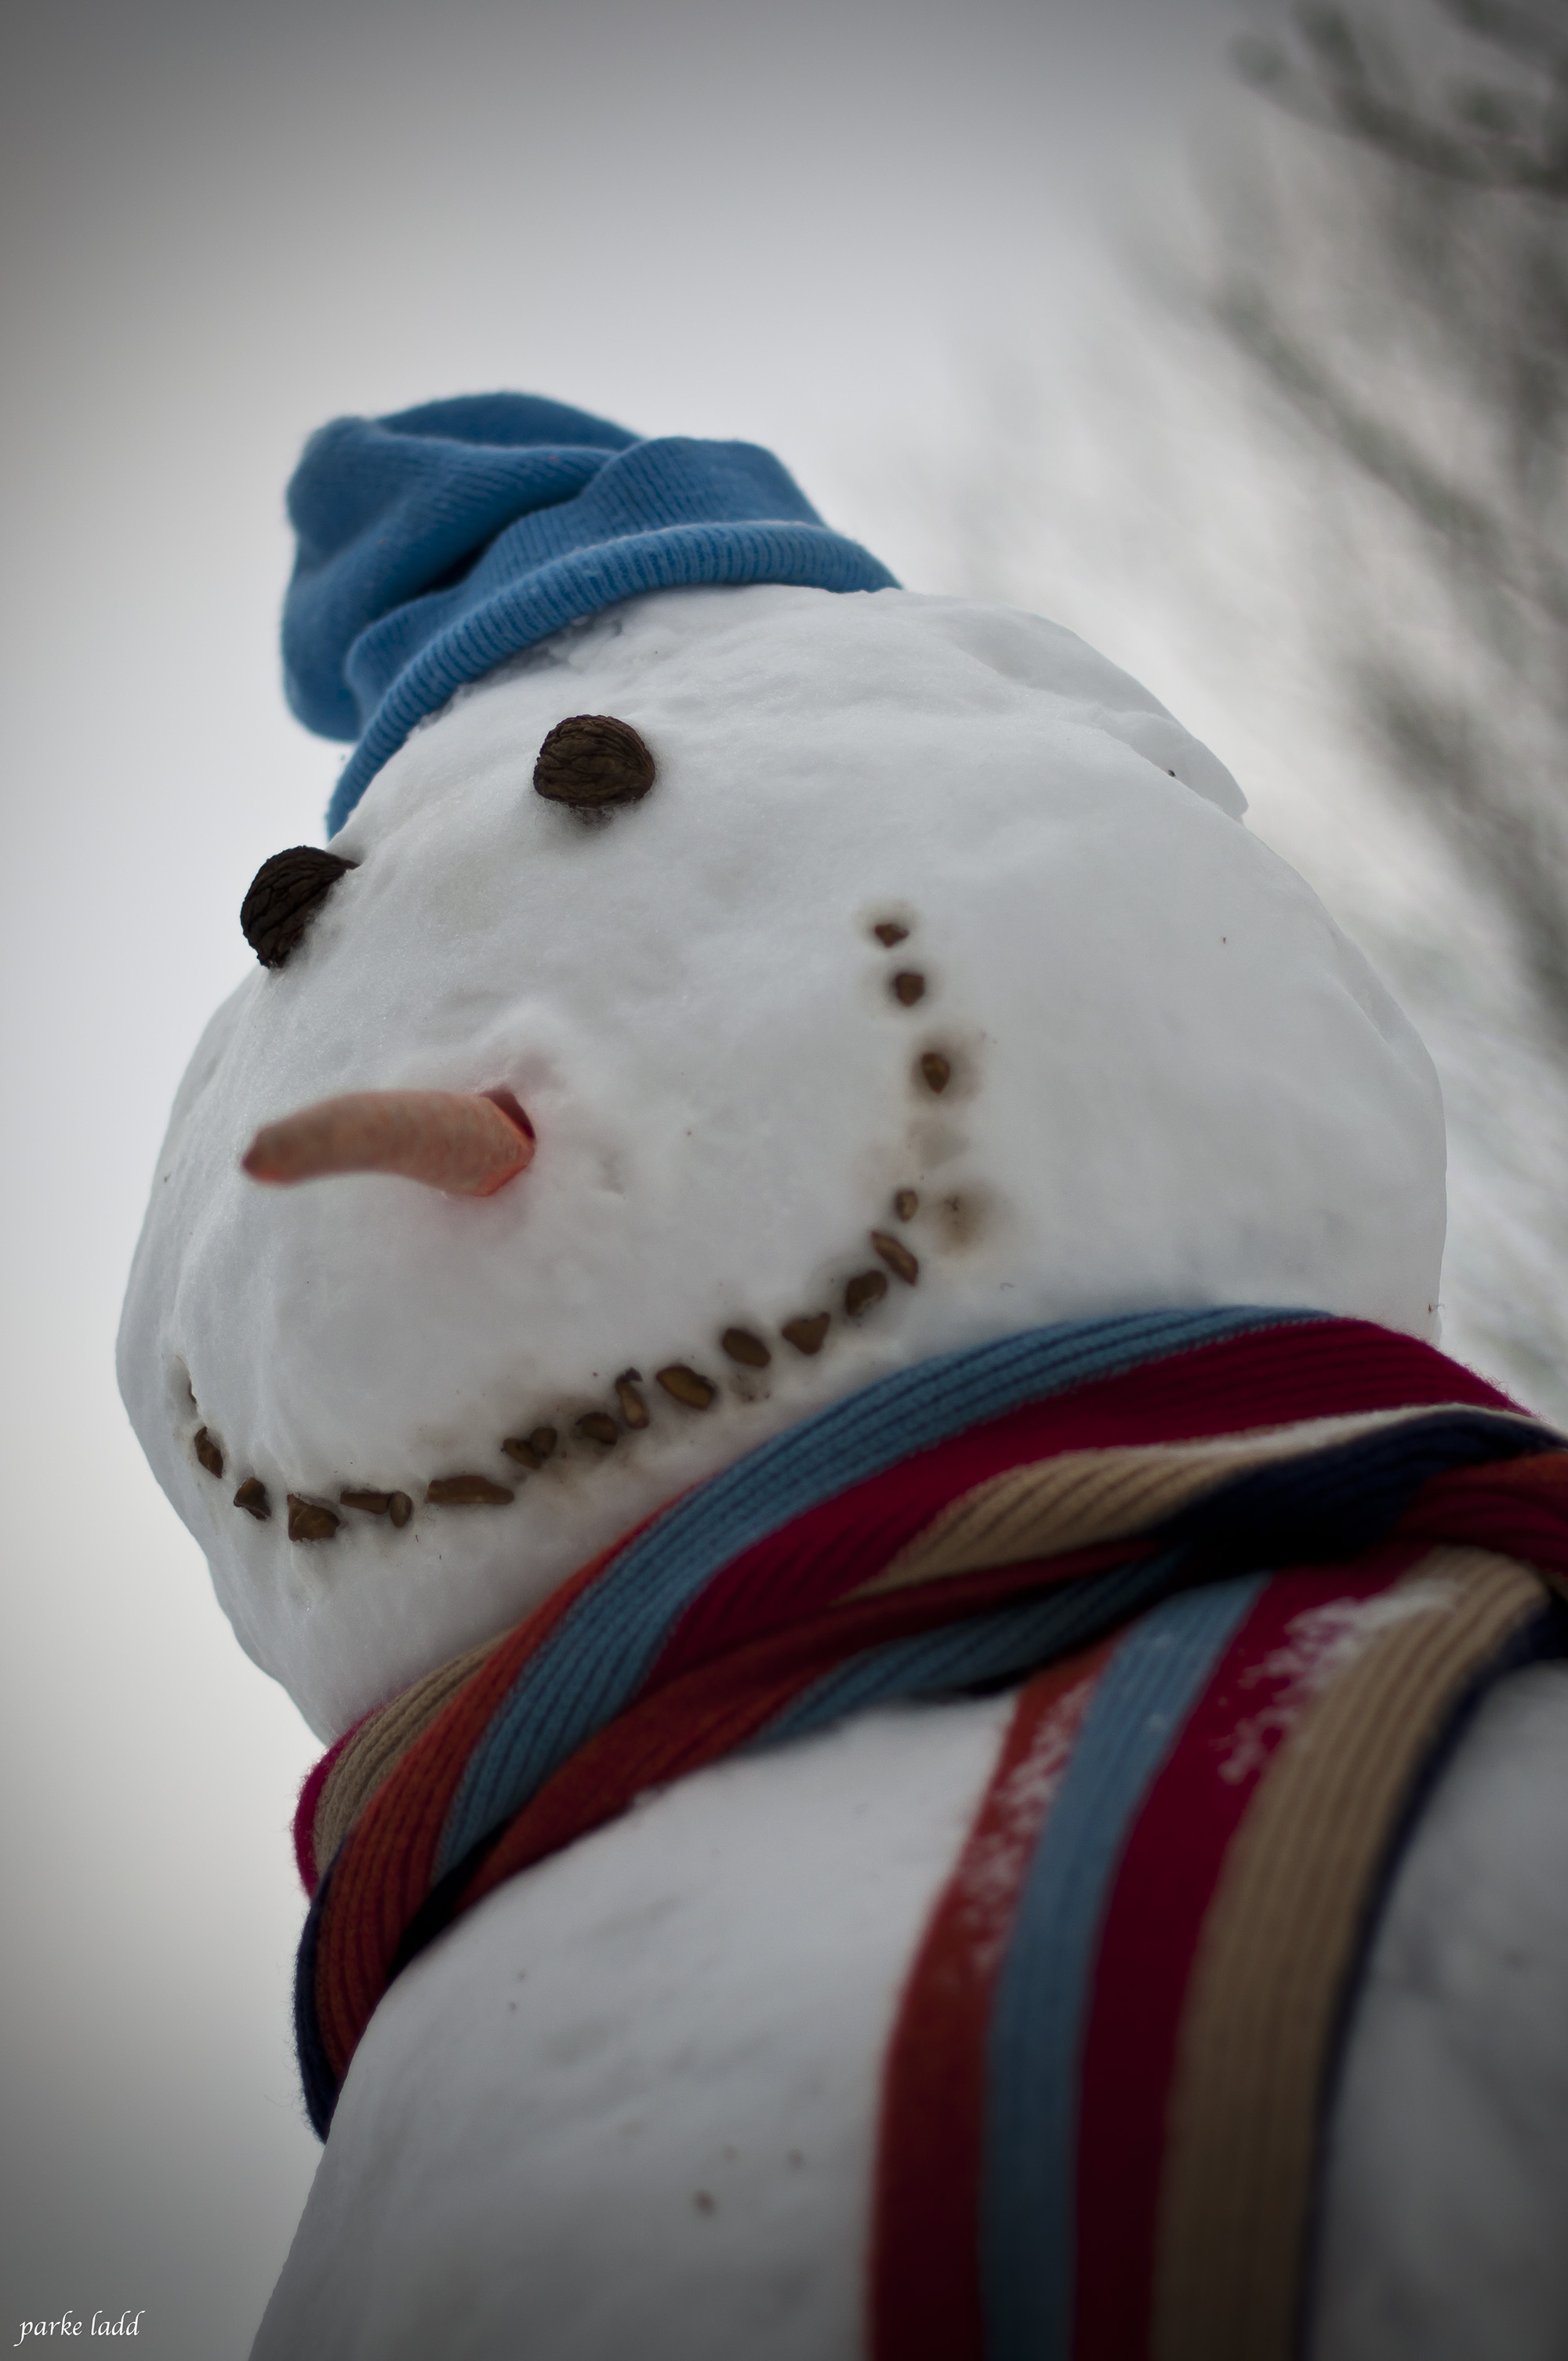 Snow Man with Scarf - Family Day, Town of Oakville, February 16 2015 | Parke J. Ladd  -  Foter  -  CC BY